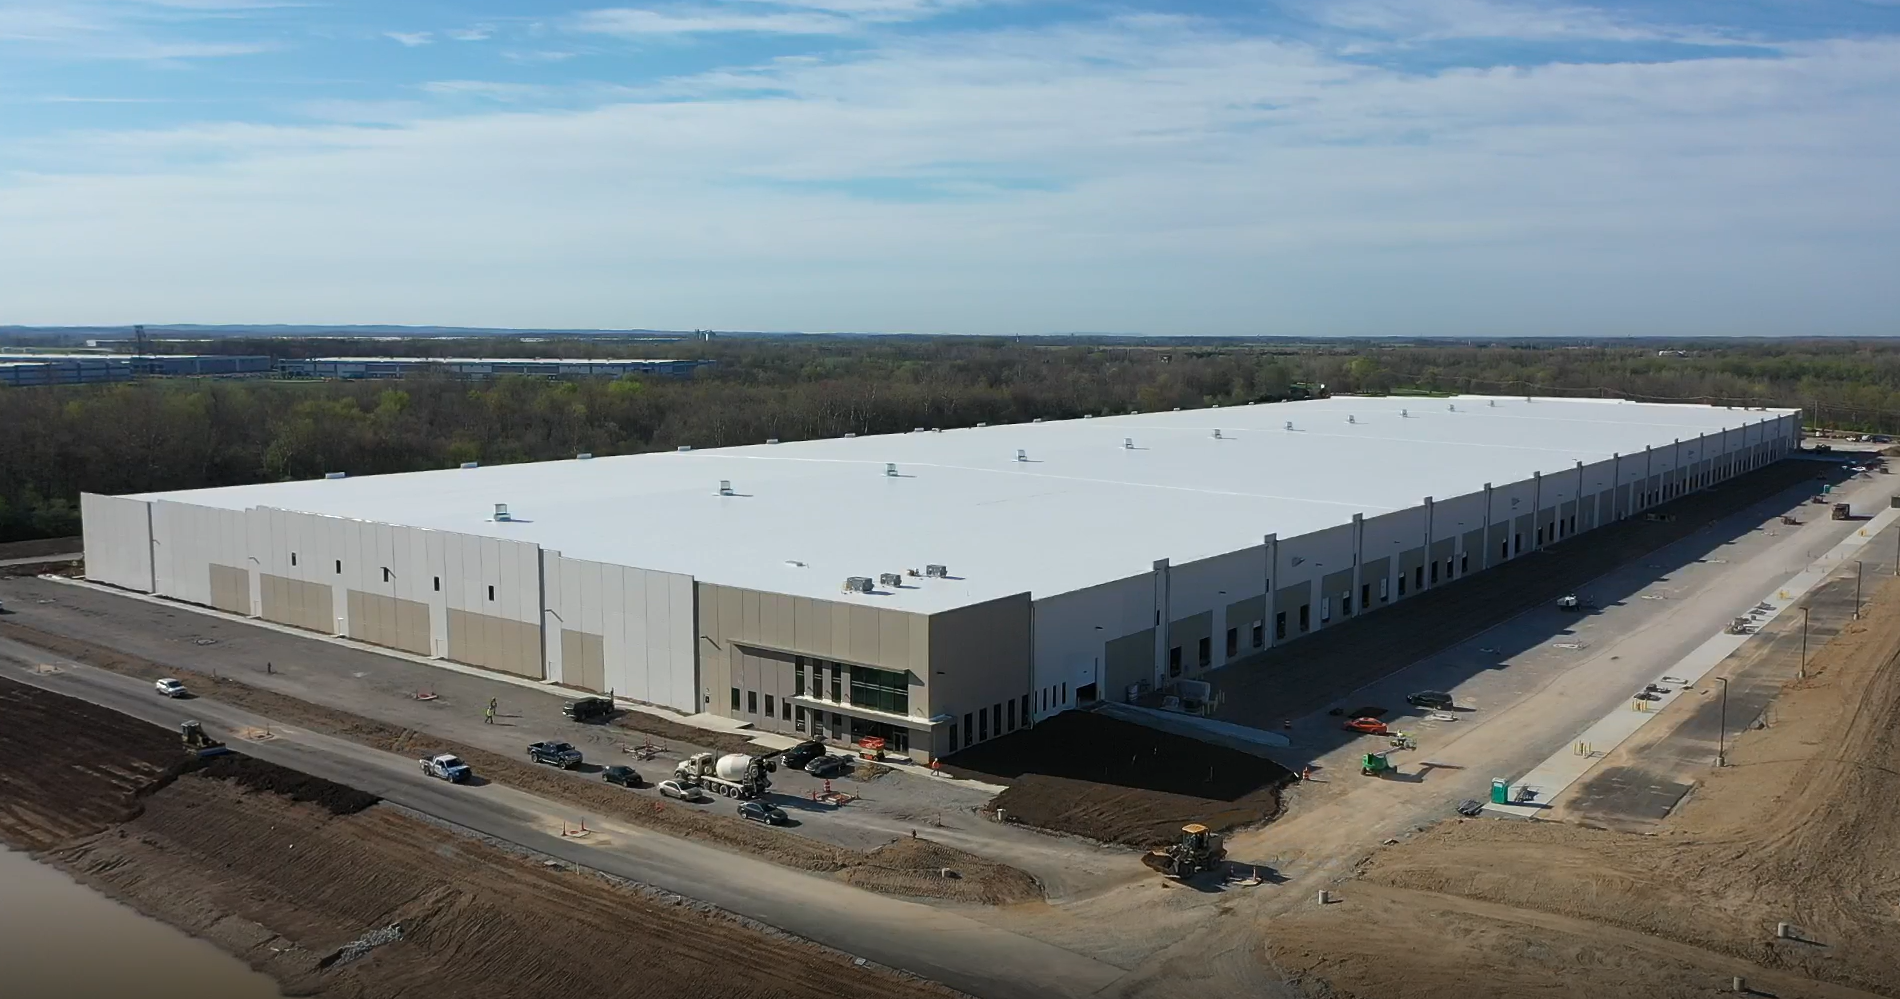 ODW Logistics adds 930,000-square-foot distribution center to its growing campus near Rickenbacker